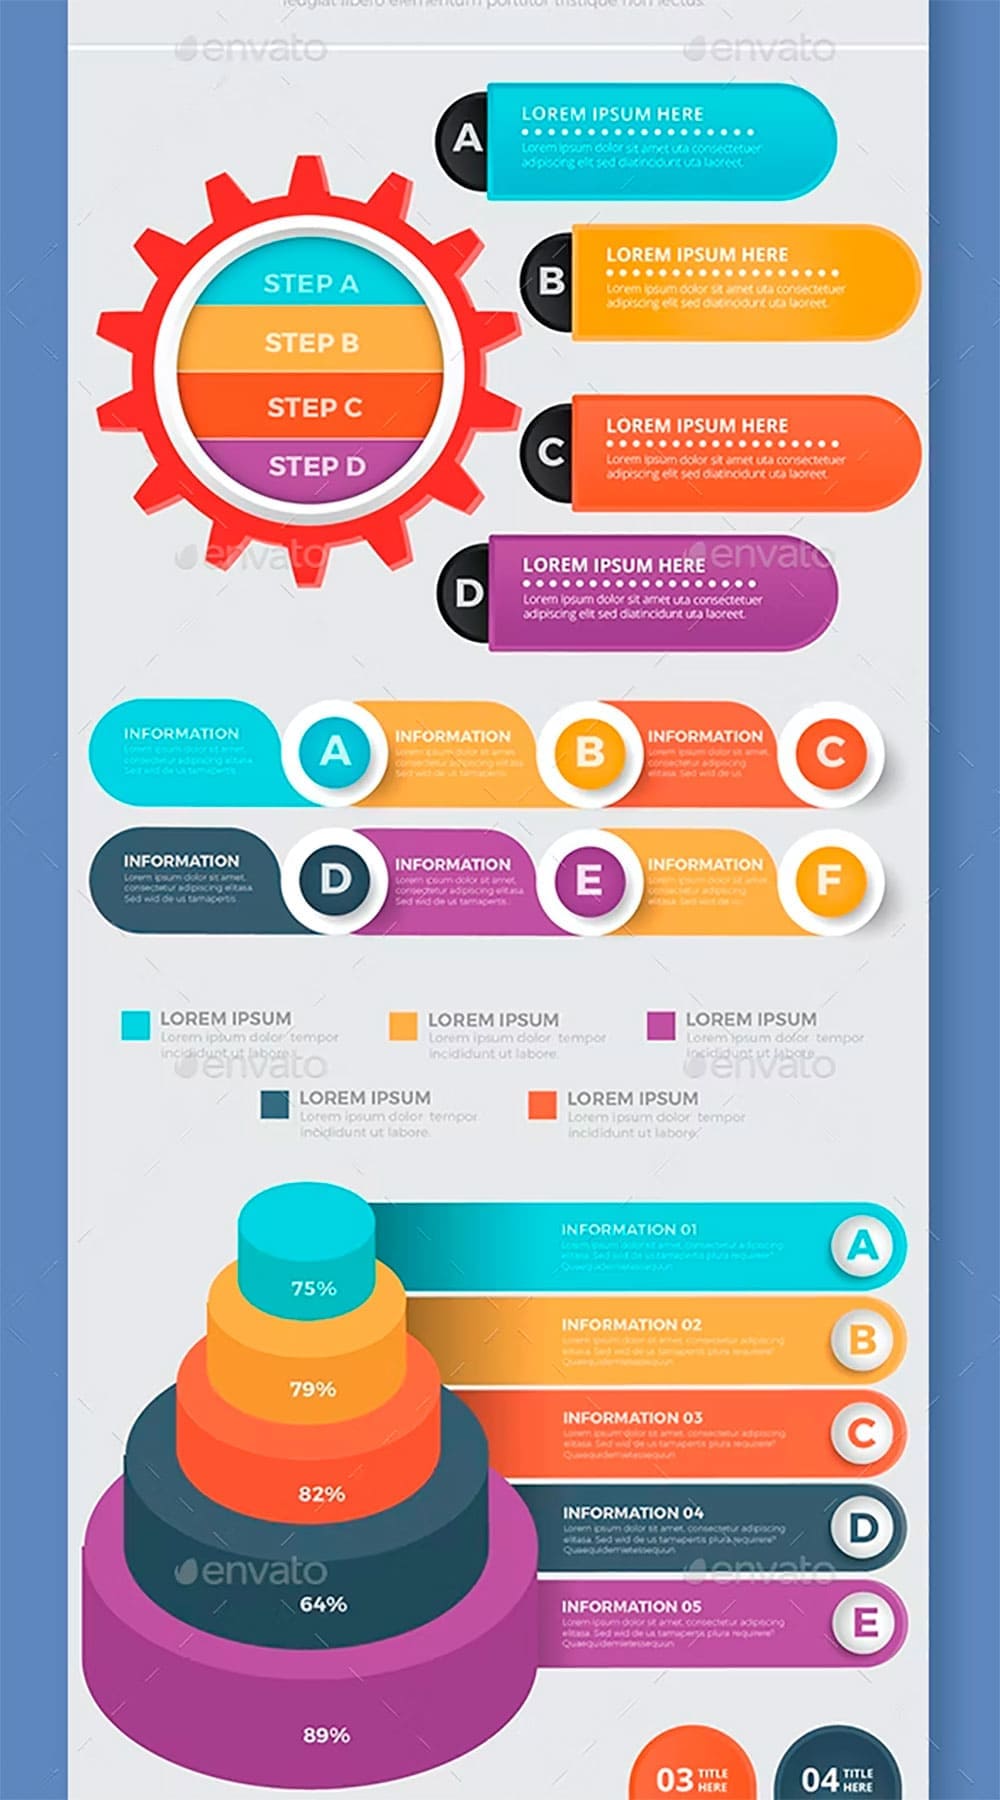 Infographic elements, picture for pinterest.